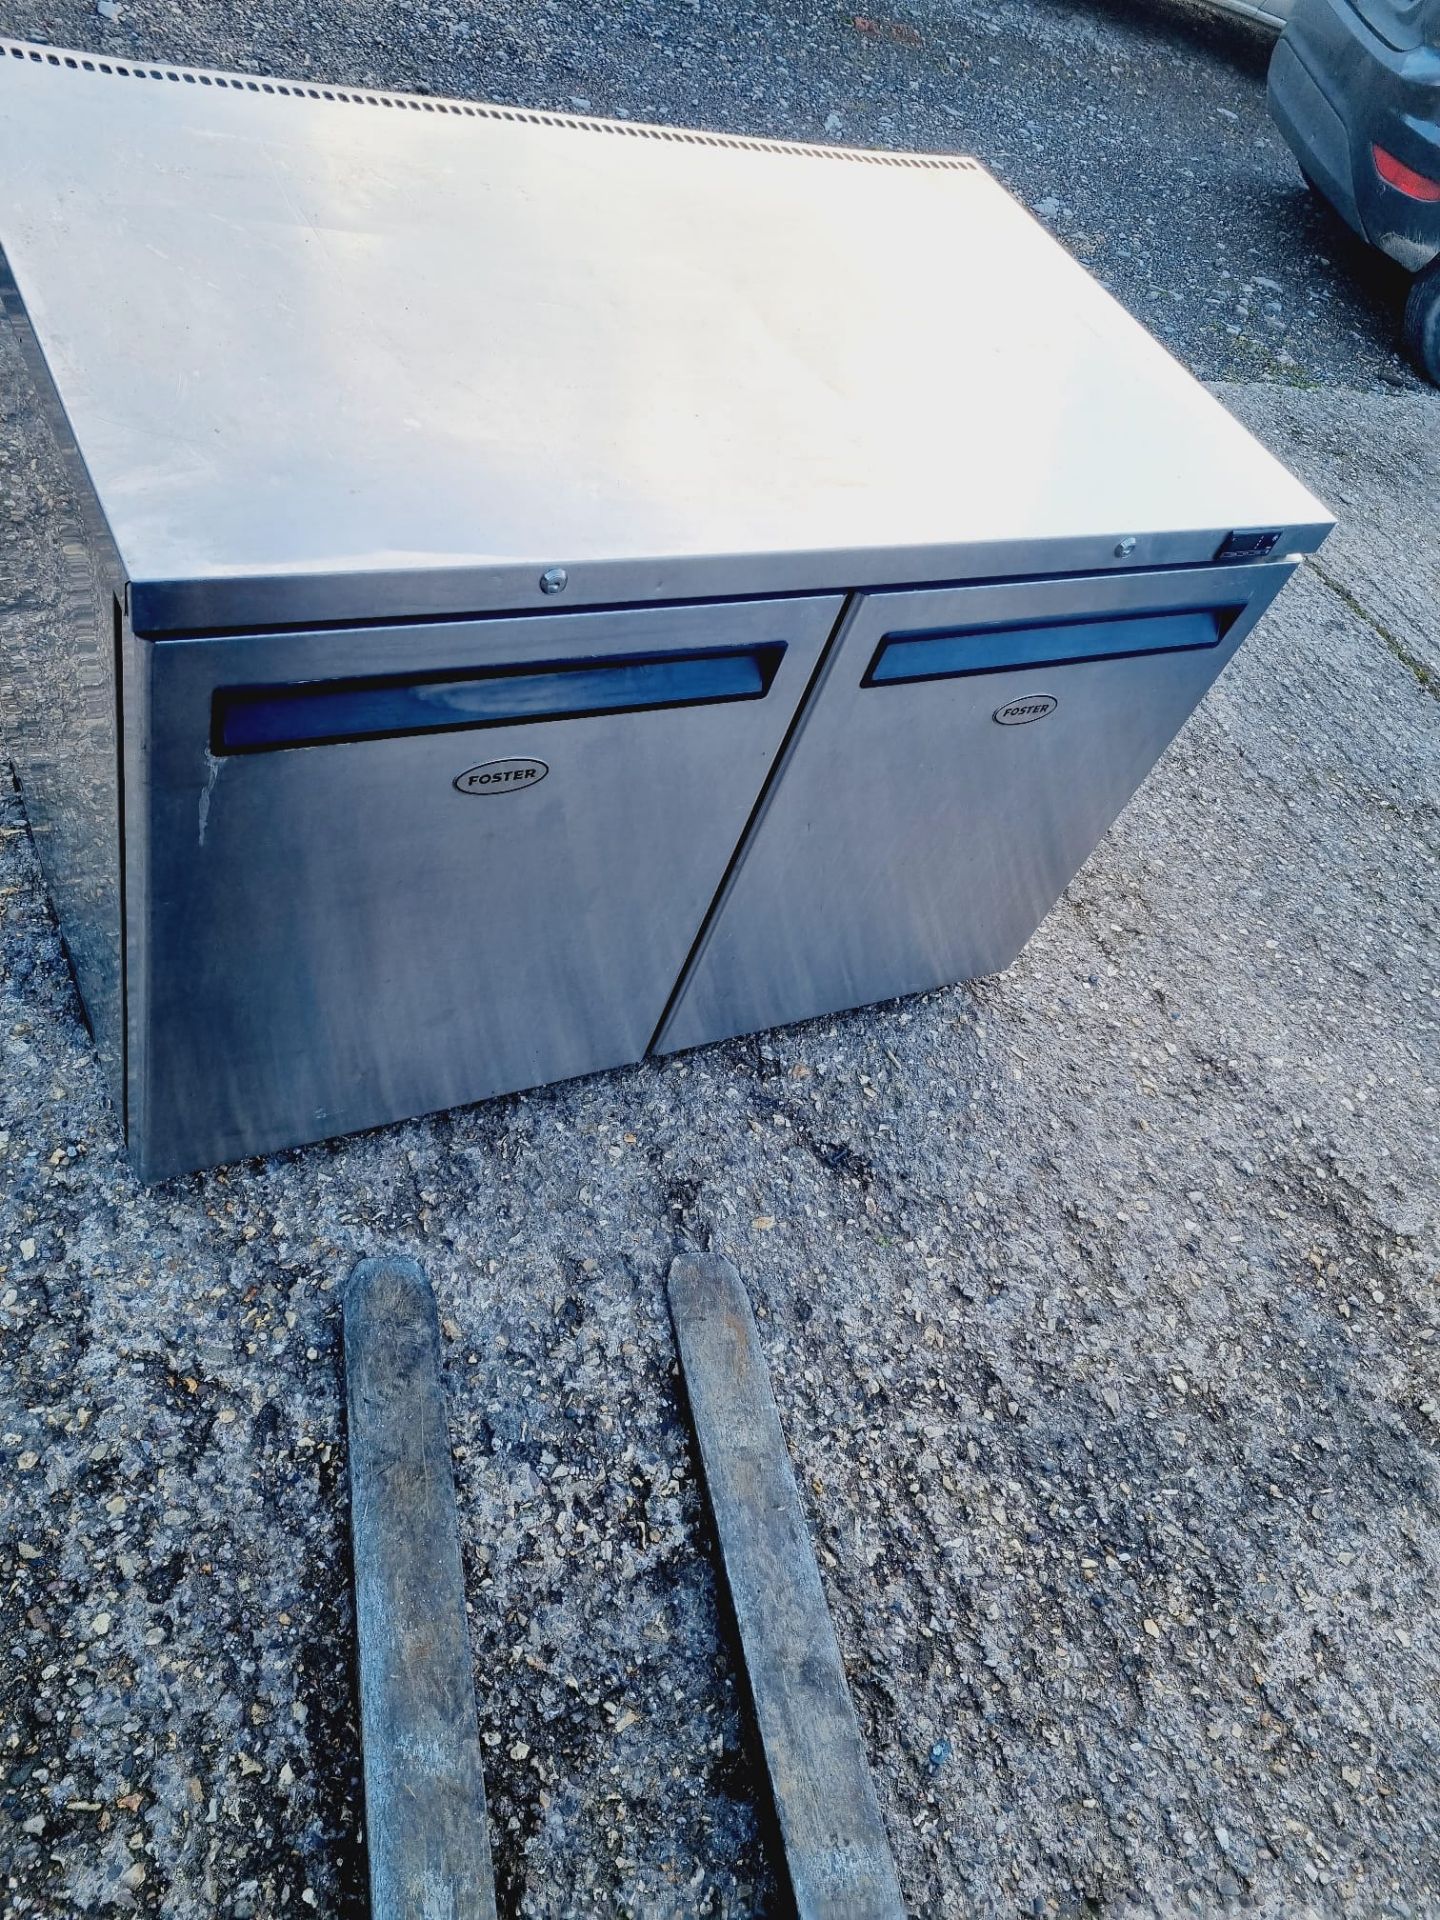 FOSTER HR360 DOUBLE DOOR FRIDGE - YEAR 2022 - 1200 MM W AND 700 D - ALMOST NEW CONDITION  - Image 6 of 6